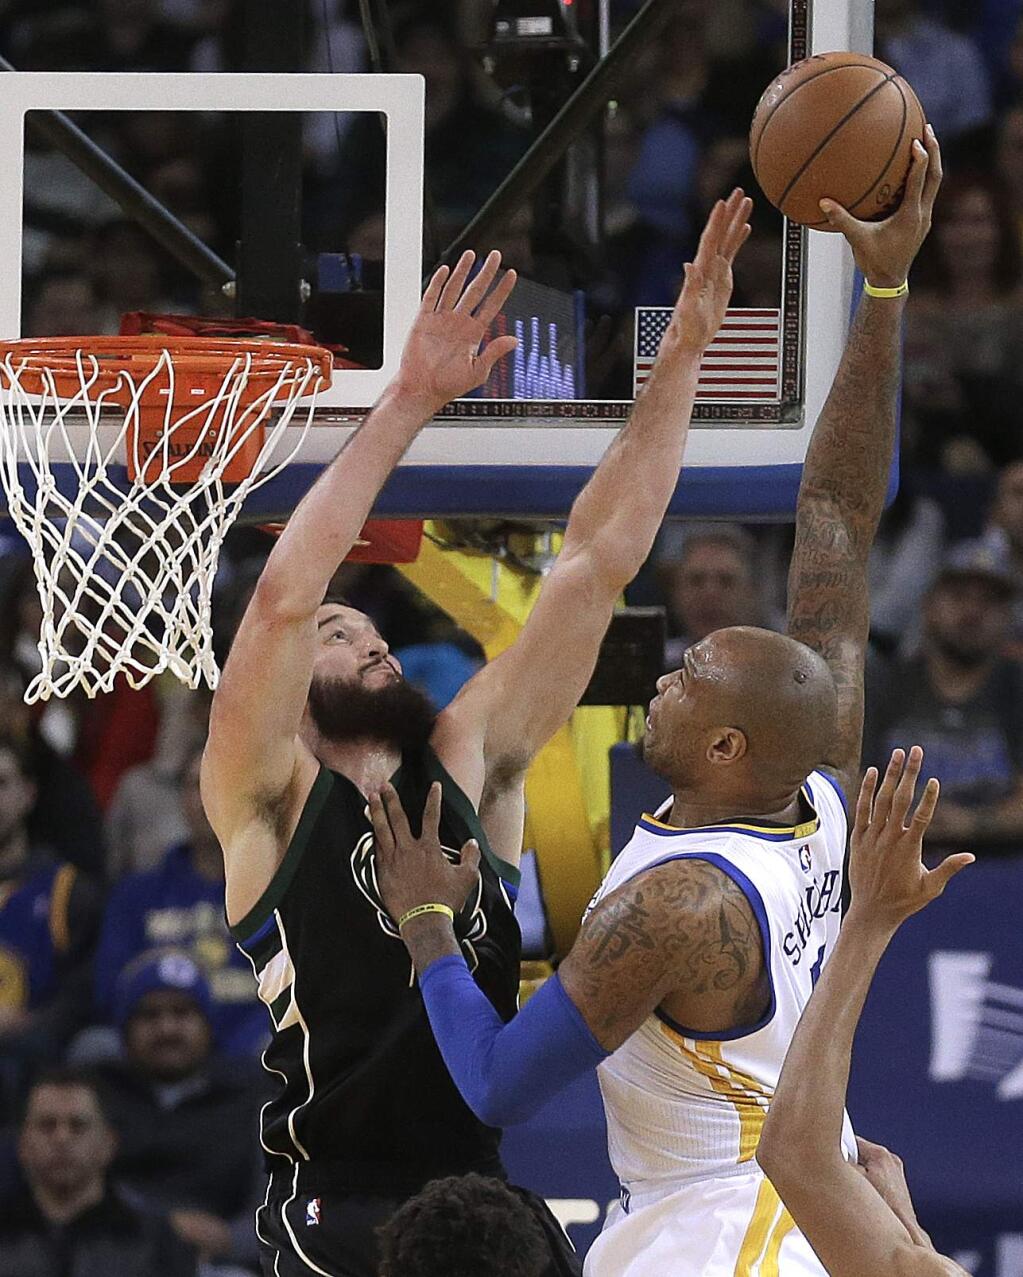 Golden State Warriors' Marreese Speights, right, shoots over Milwaukee Bucks' Miles Plumlee during the first half of an NBA basketball game Friday, Dec. 18, 2015, in Oakland, Calif. (AP Photo/Ben Margot)